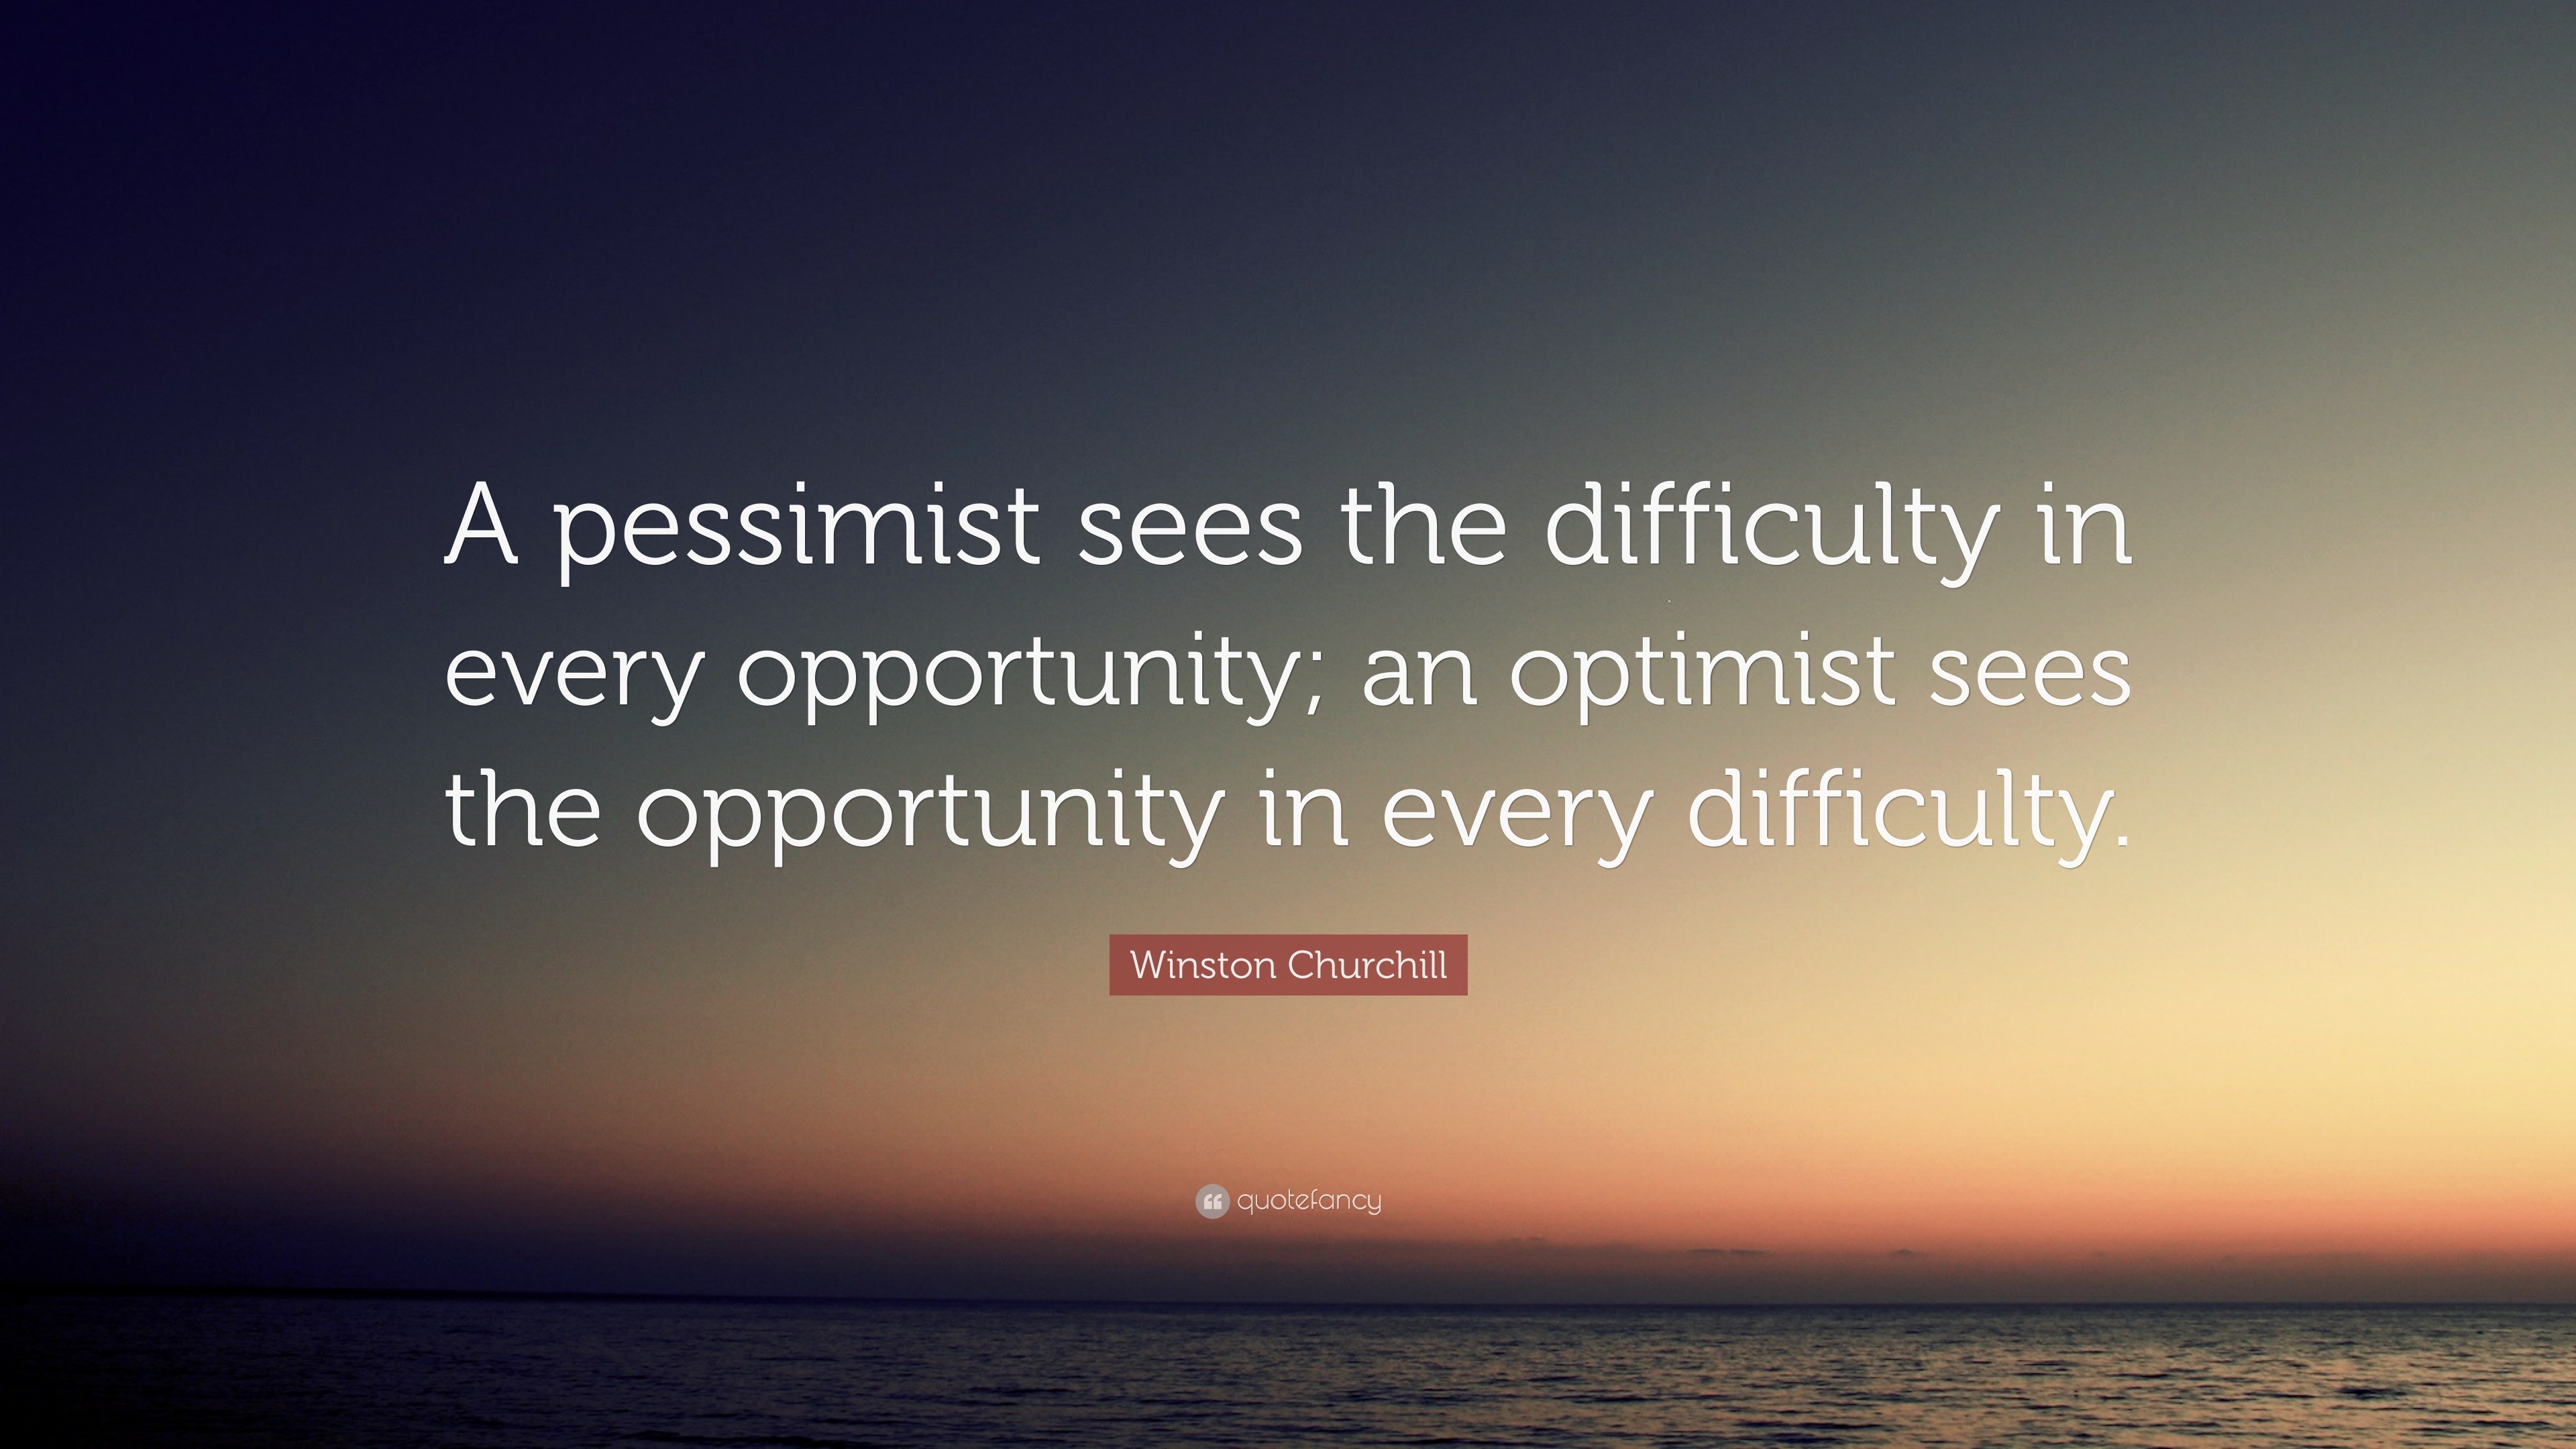 Winston Churchill Quote “A pessimist sees the difficulty